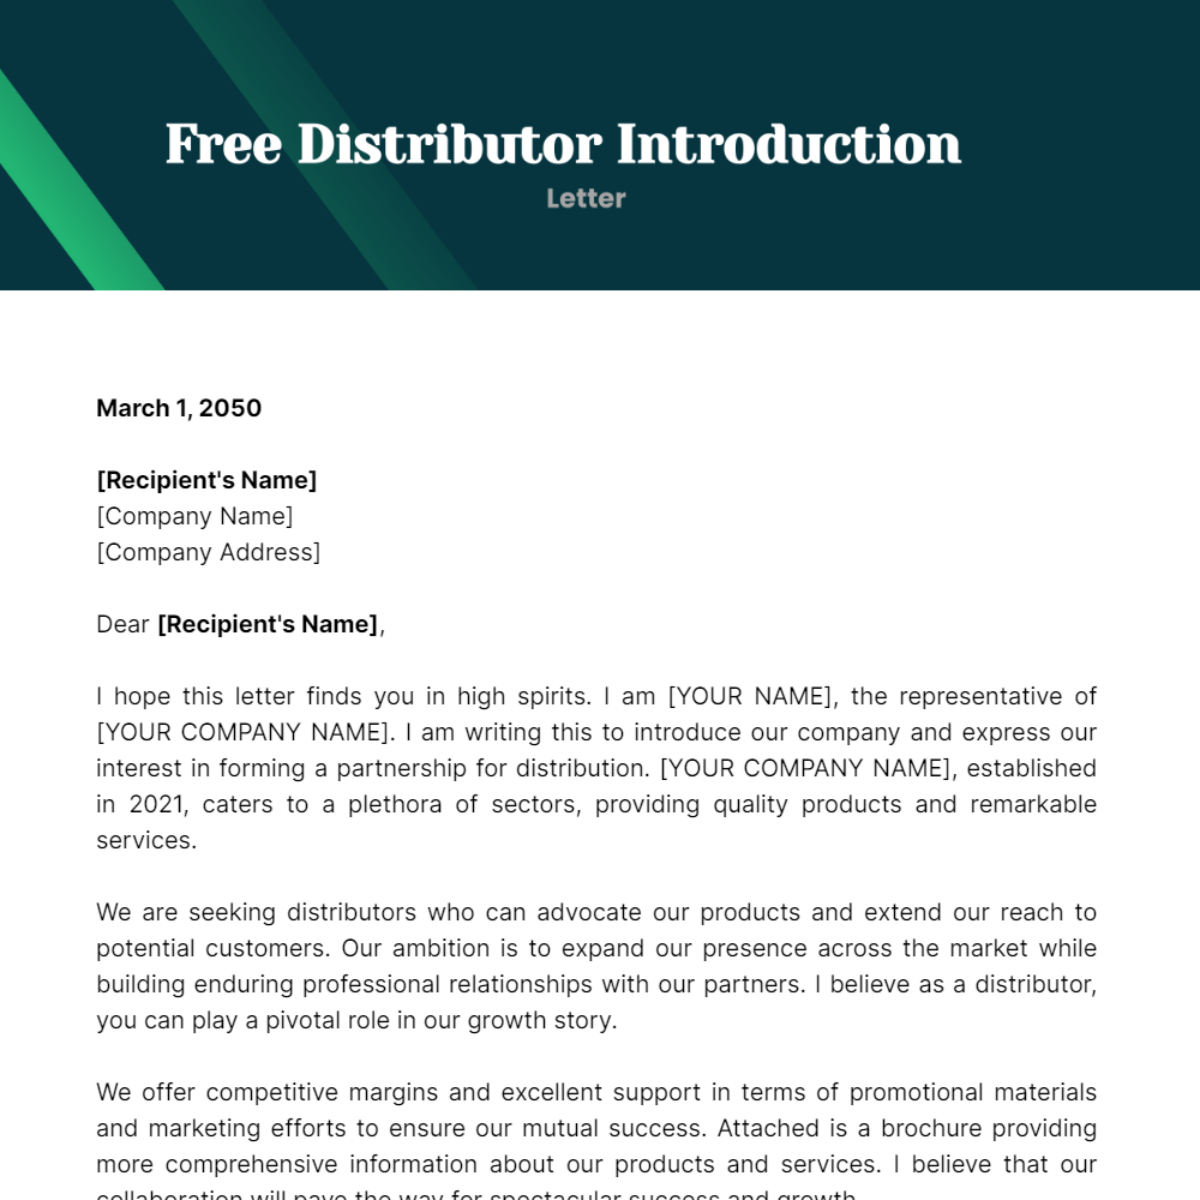 Distributor Introduction Letter Template